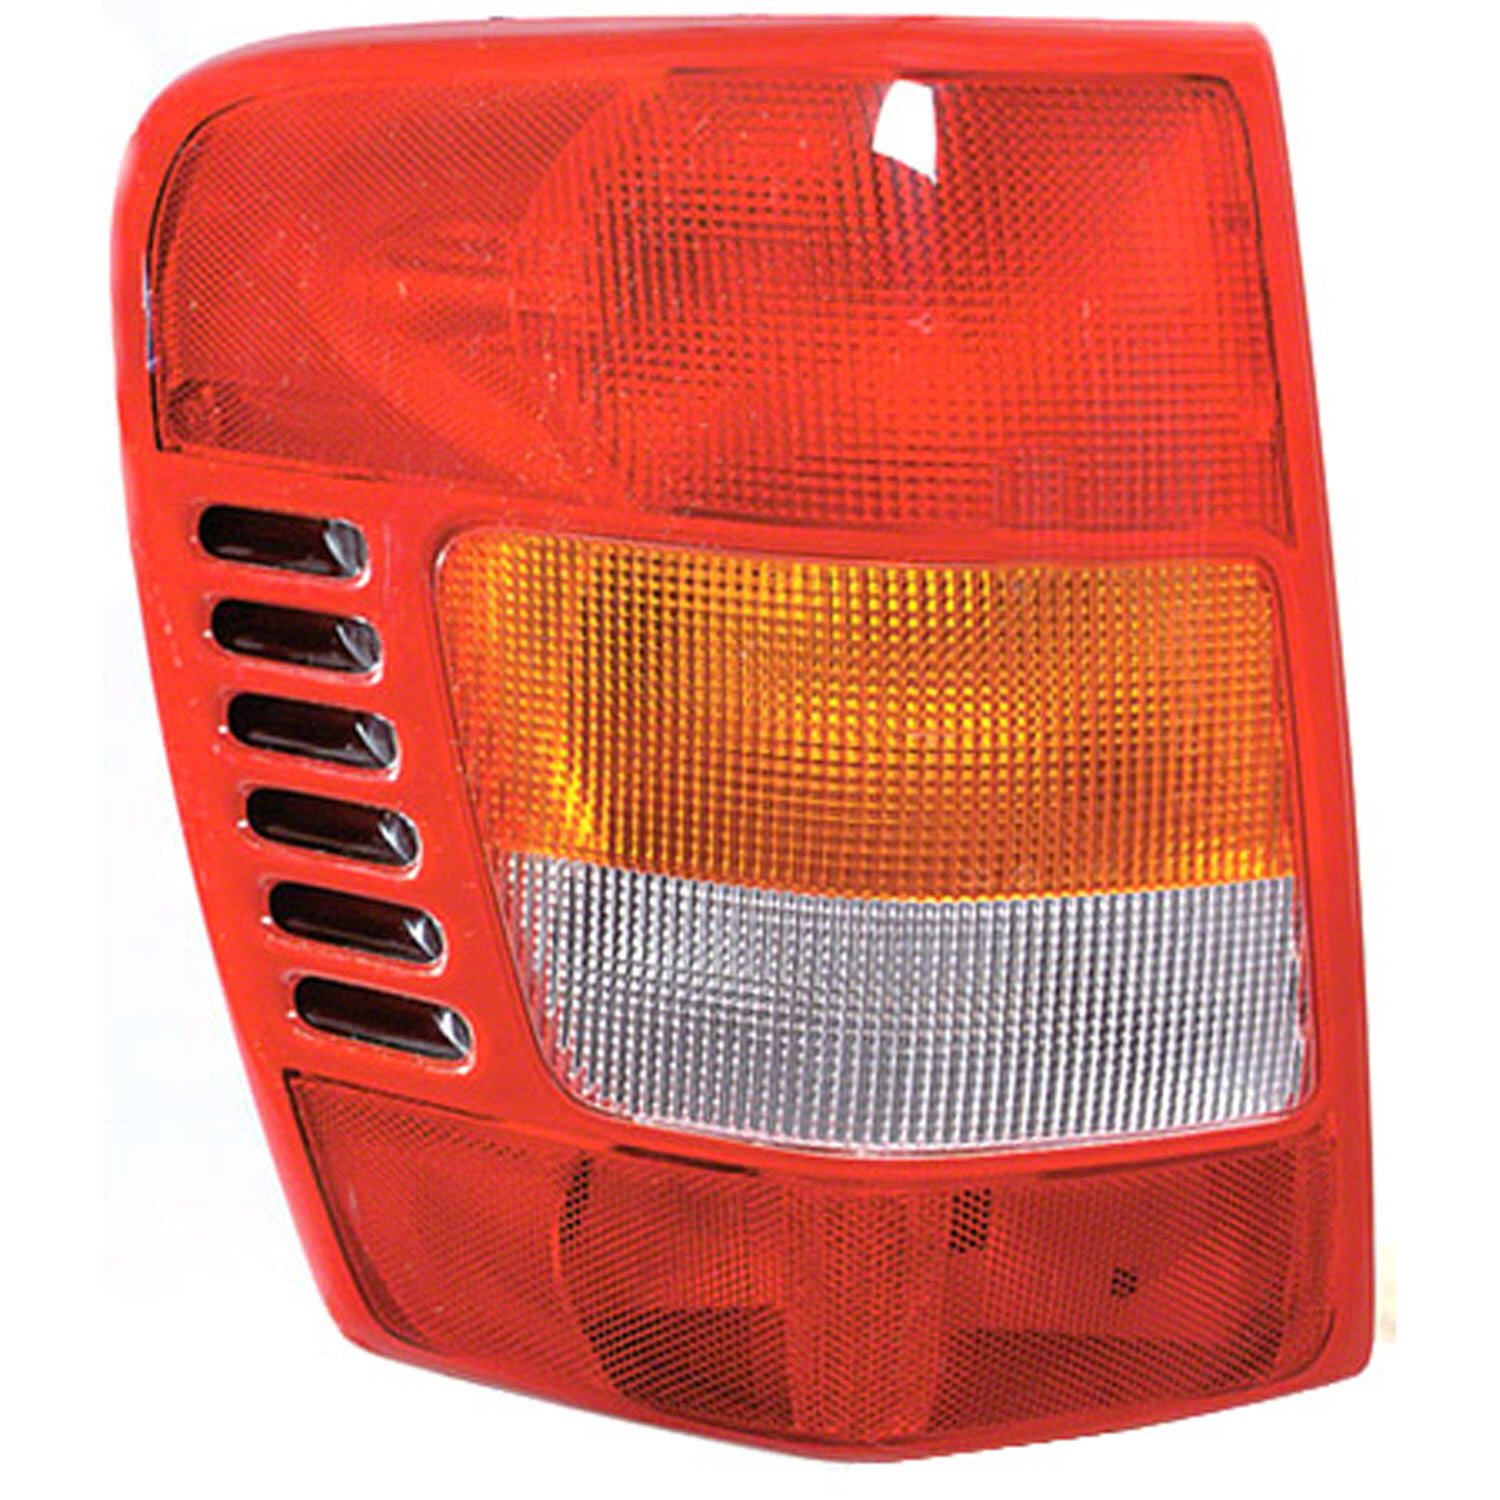 Right Tail Light Taillamp Passenger Side RH for 99-03 Jeep Grand Cherokee